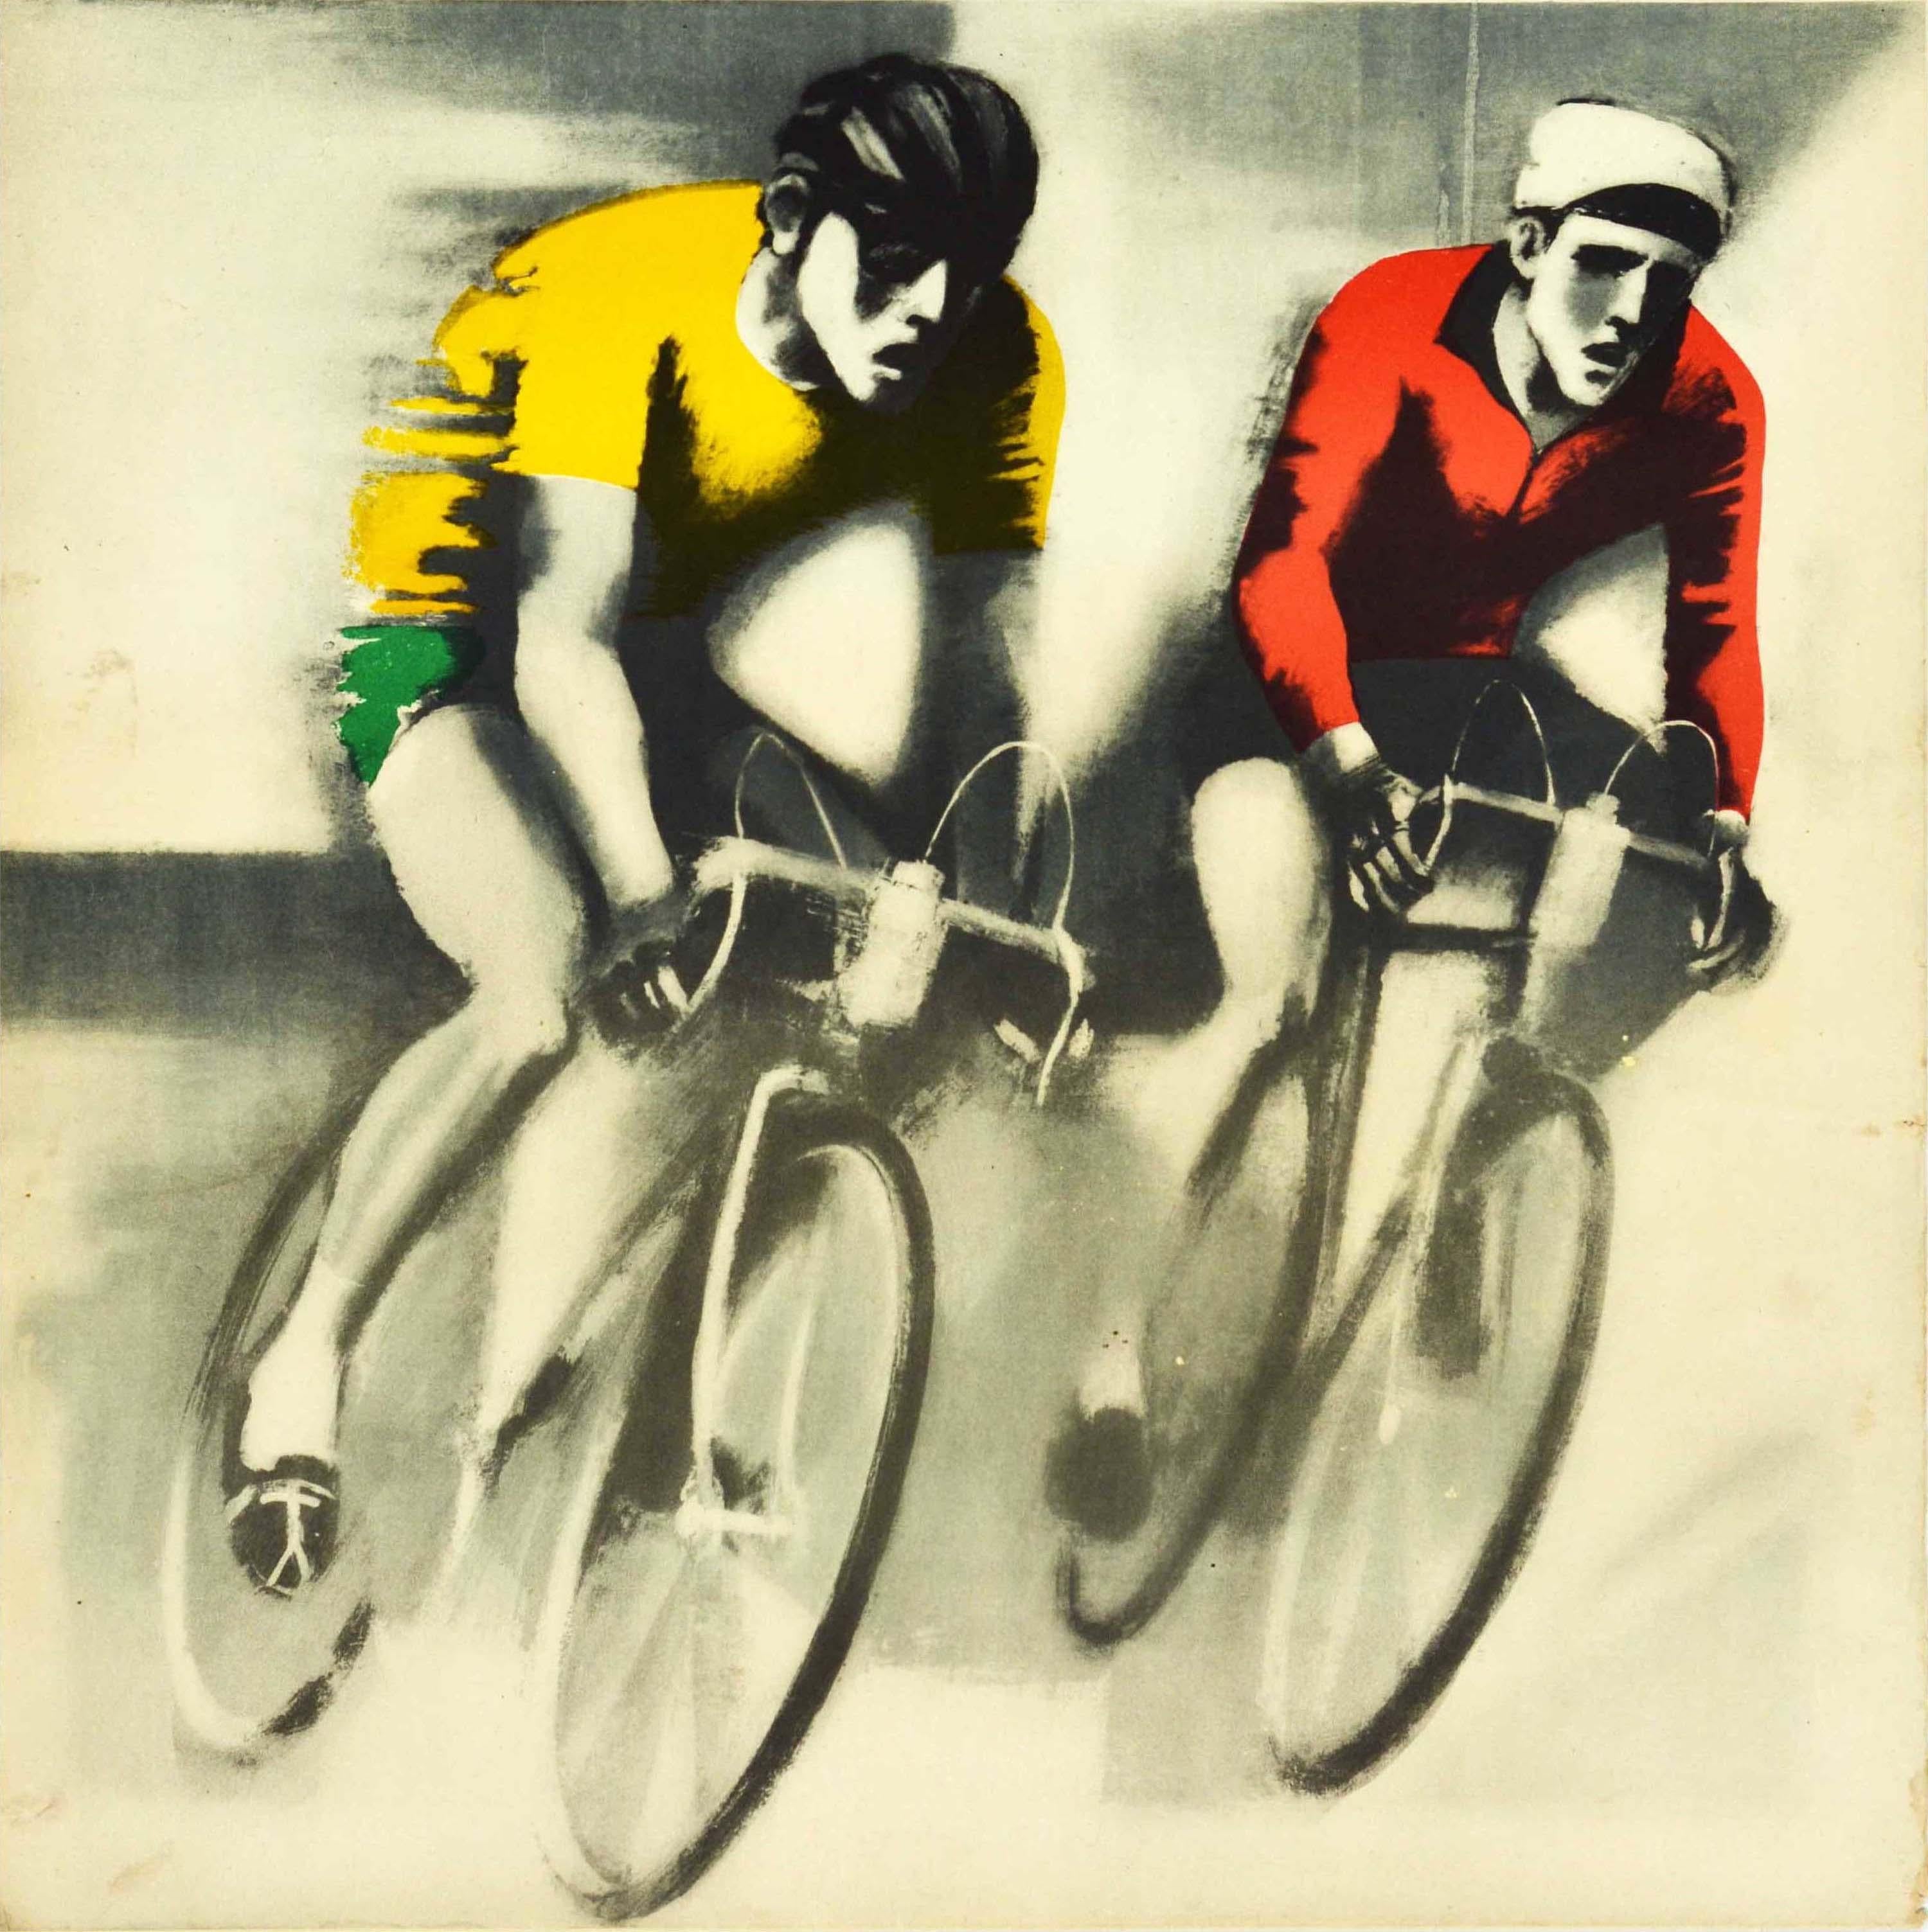 Original Vintage Sport Poster Cycling Youth Student Festival Sofia Bulgaria - Print by Unknown